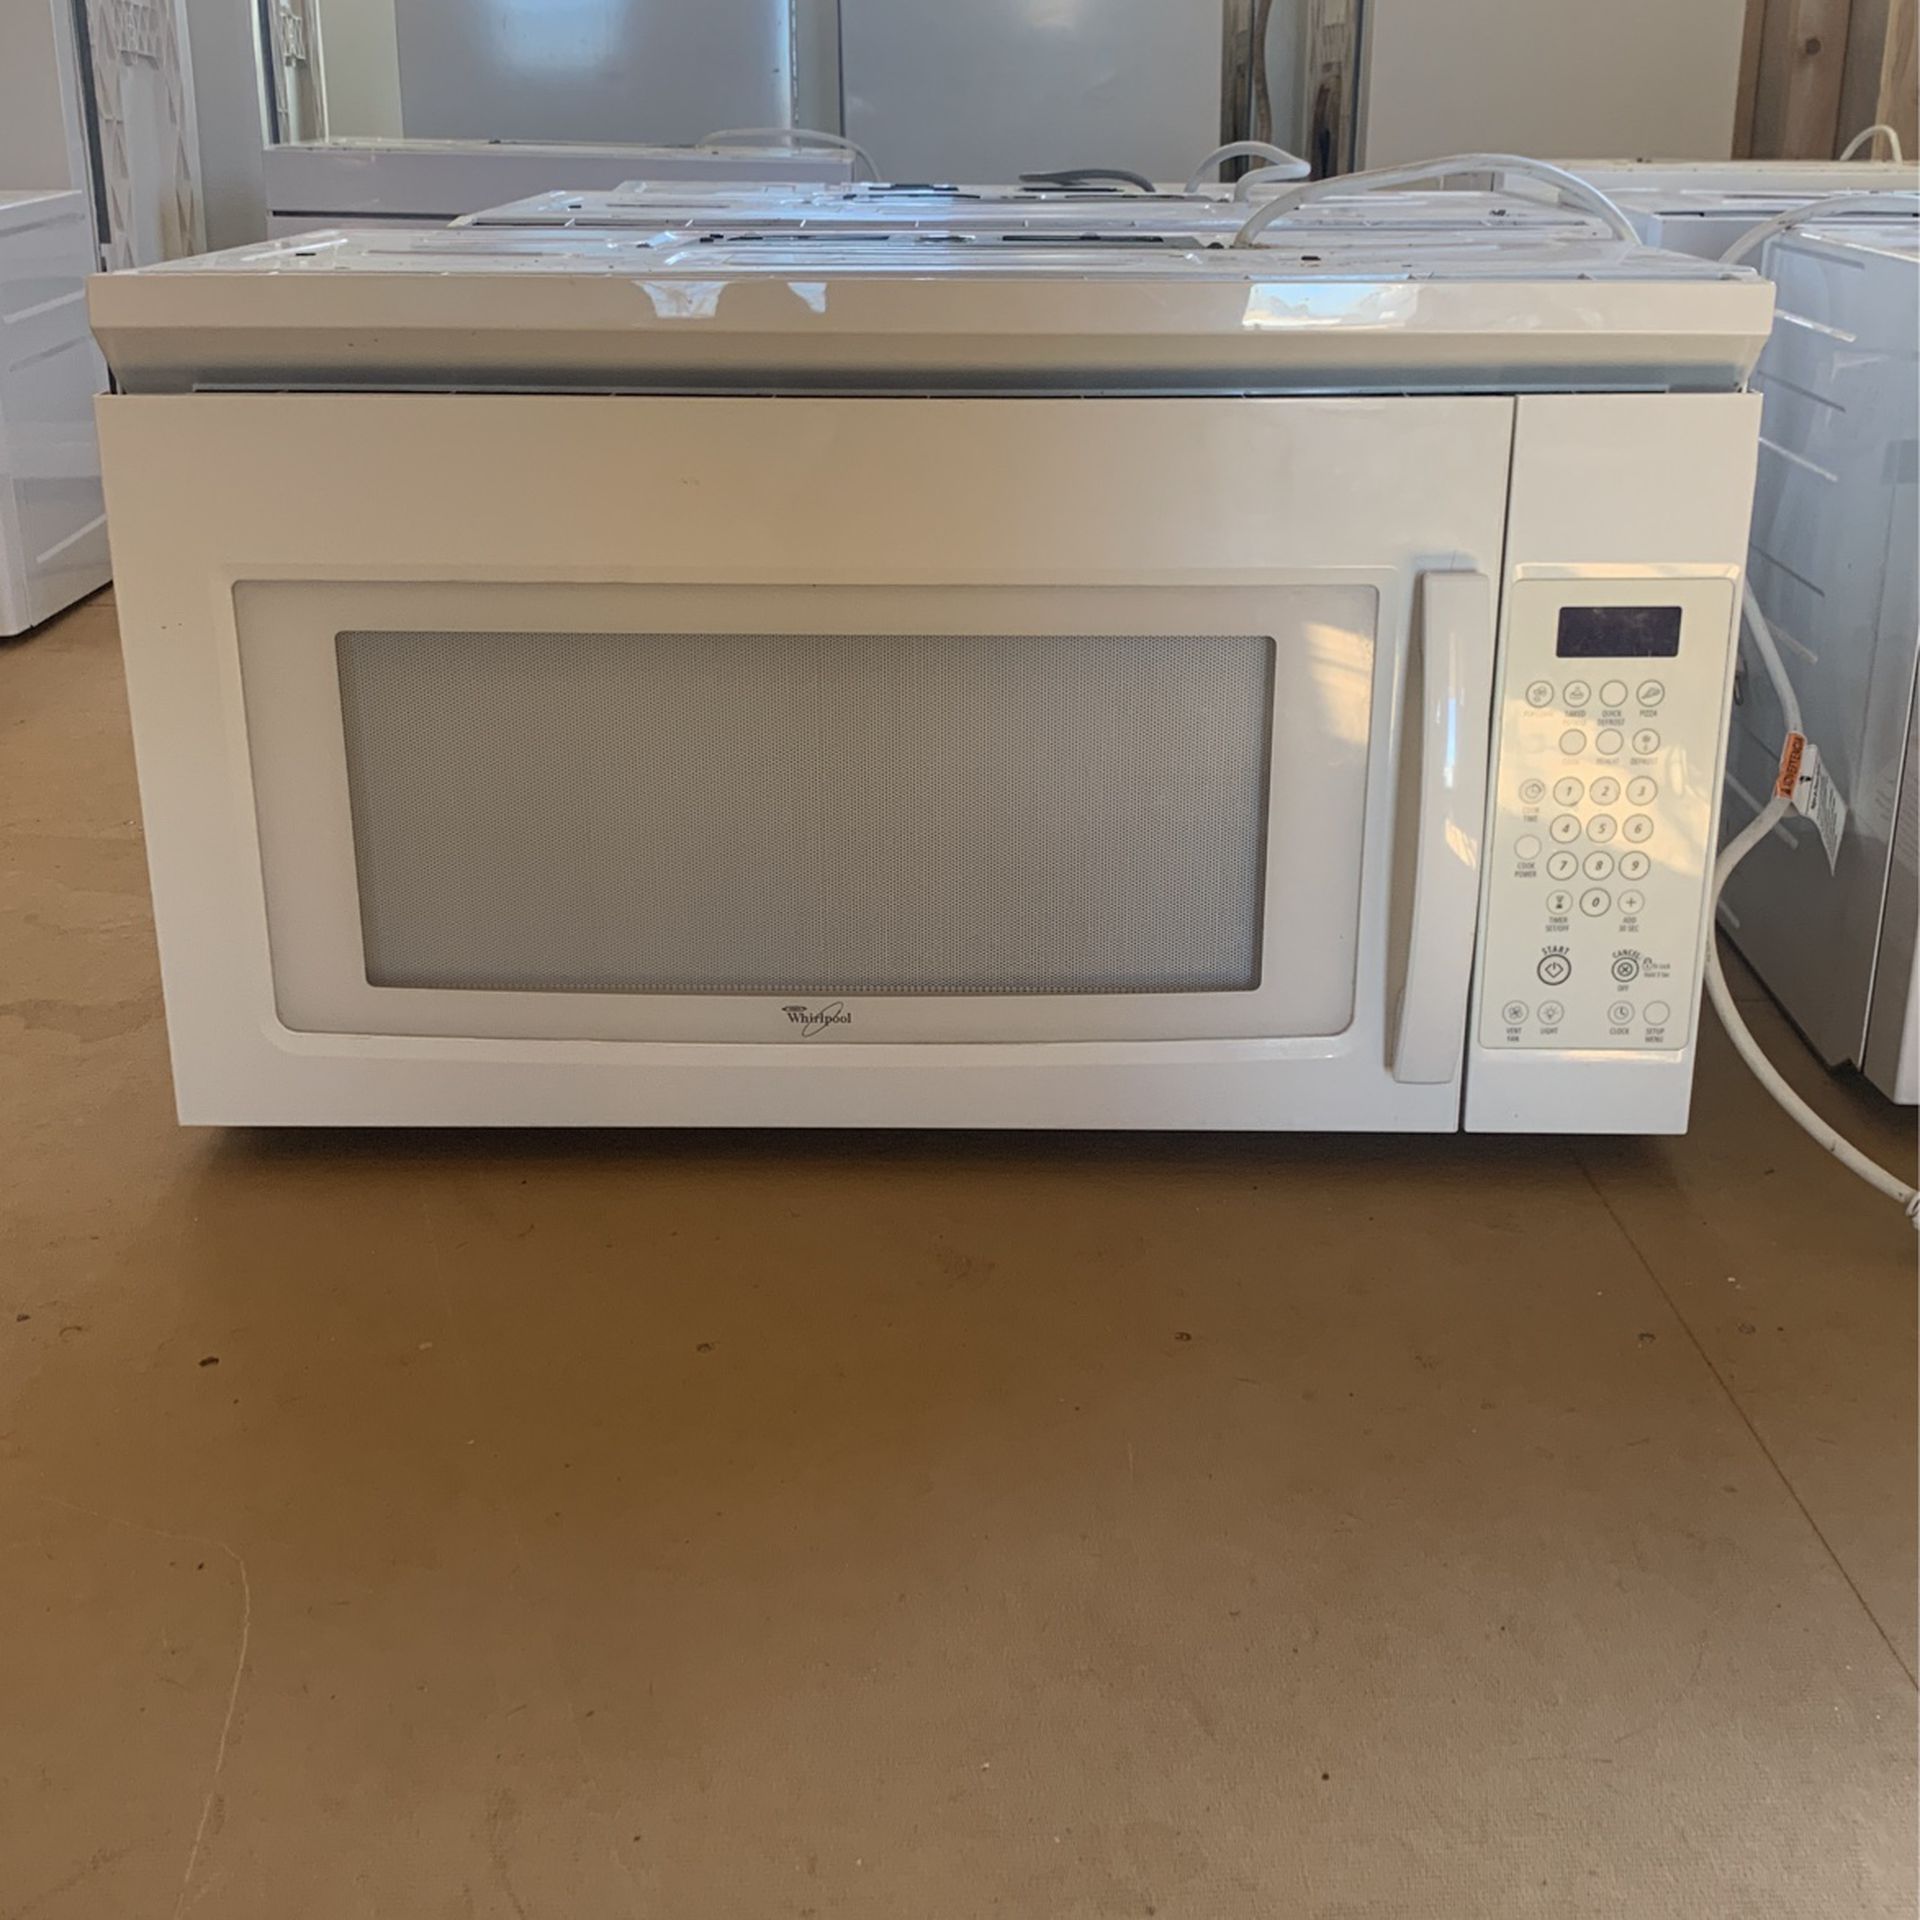 Whirlpool Dishwashers And Microwaves